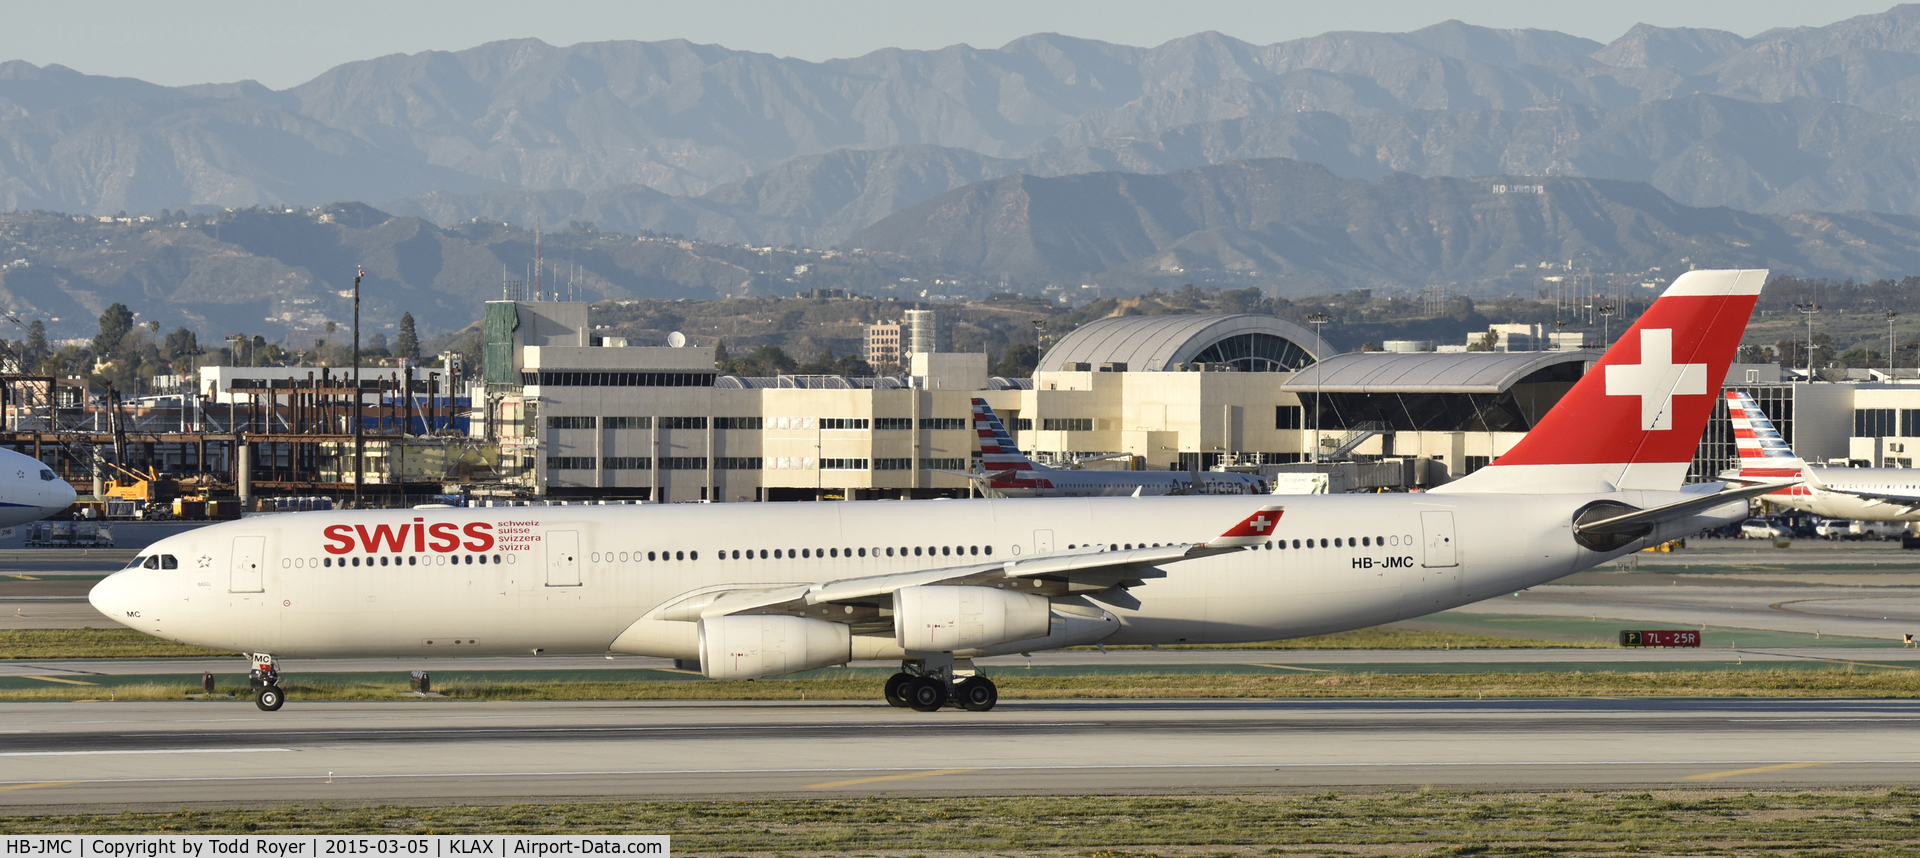 HB-JMC, 2003 Airbus A340-313 C/N 546, Arrived at LAX on 25L